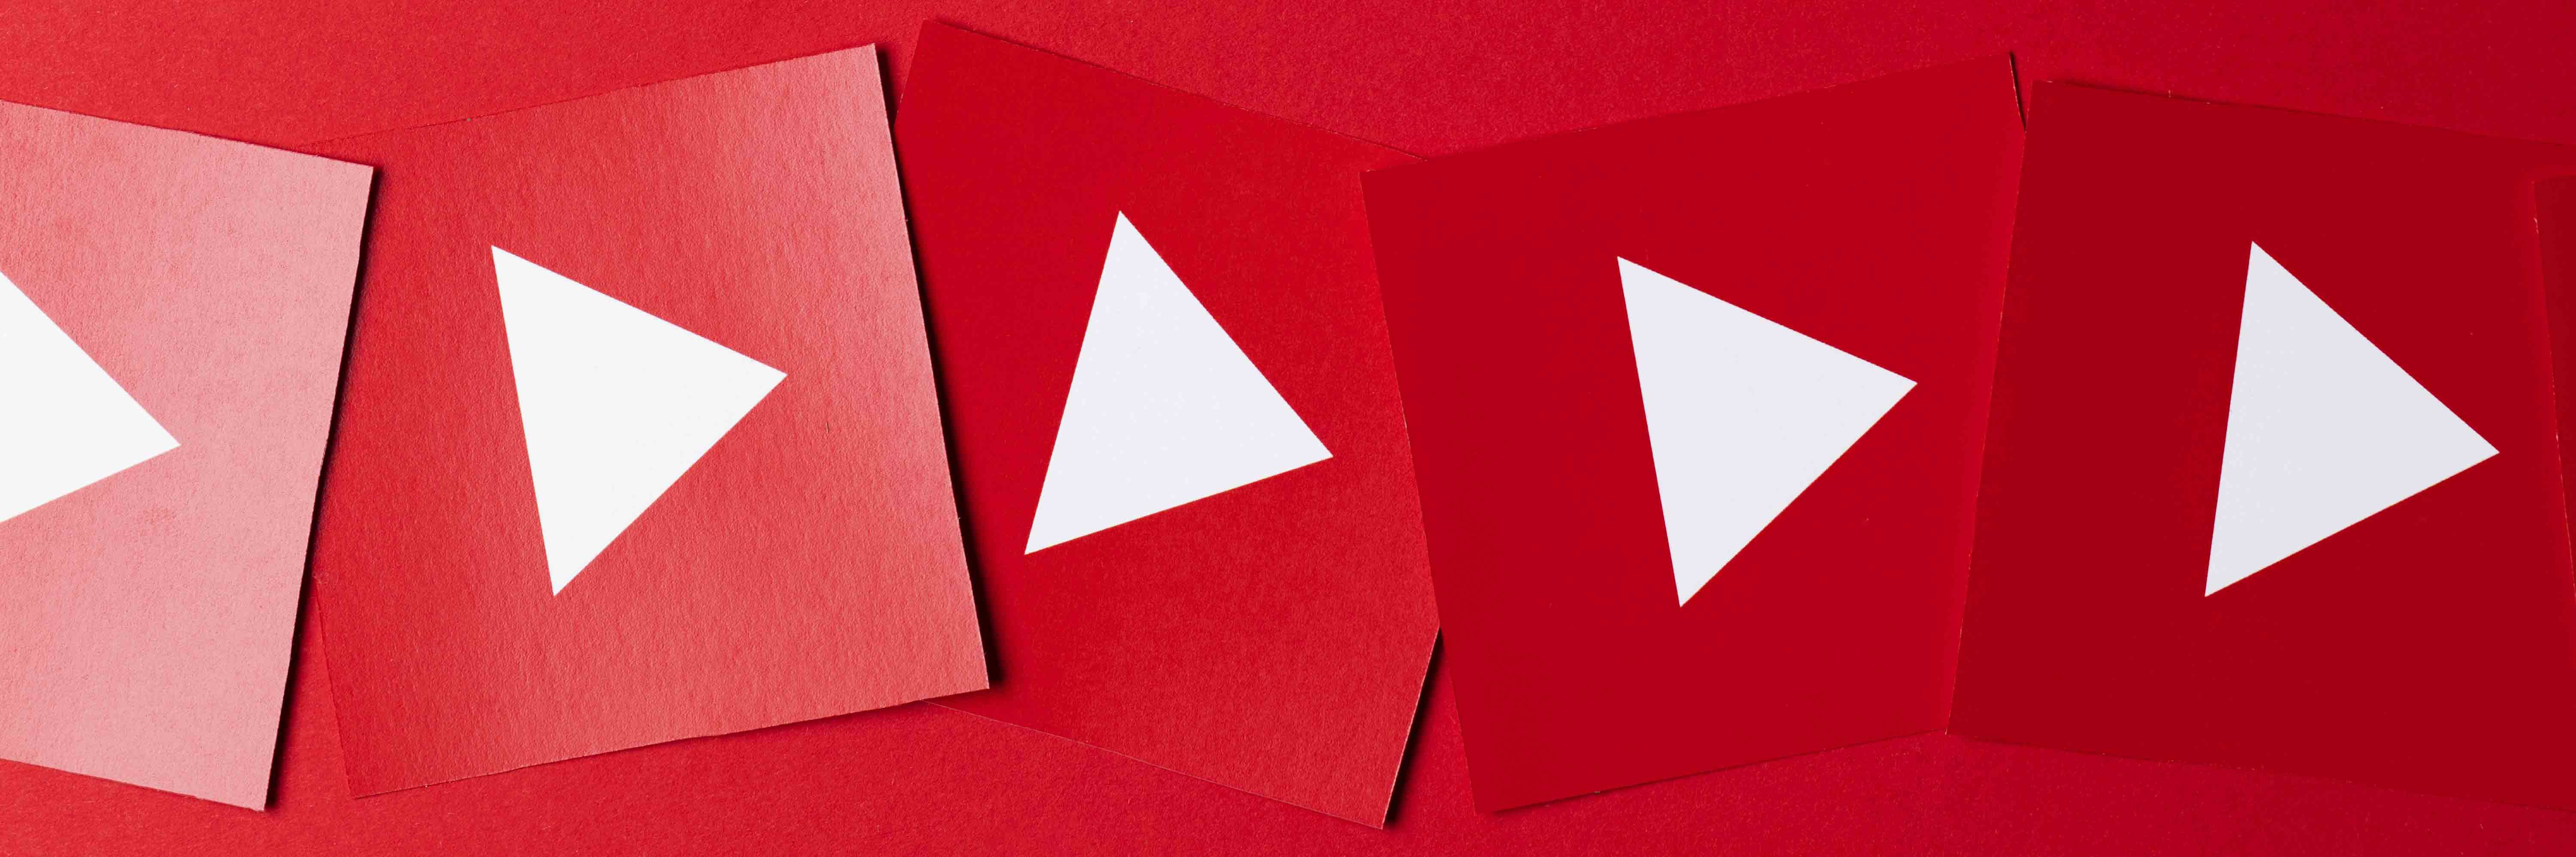 YouTube Algorithm Guide: How Your Videos Are Recommended to Viewers